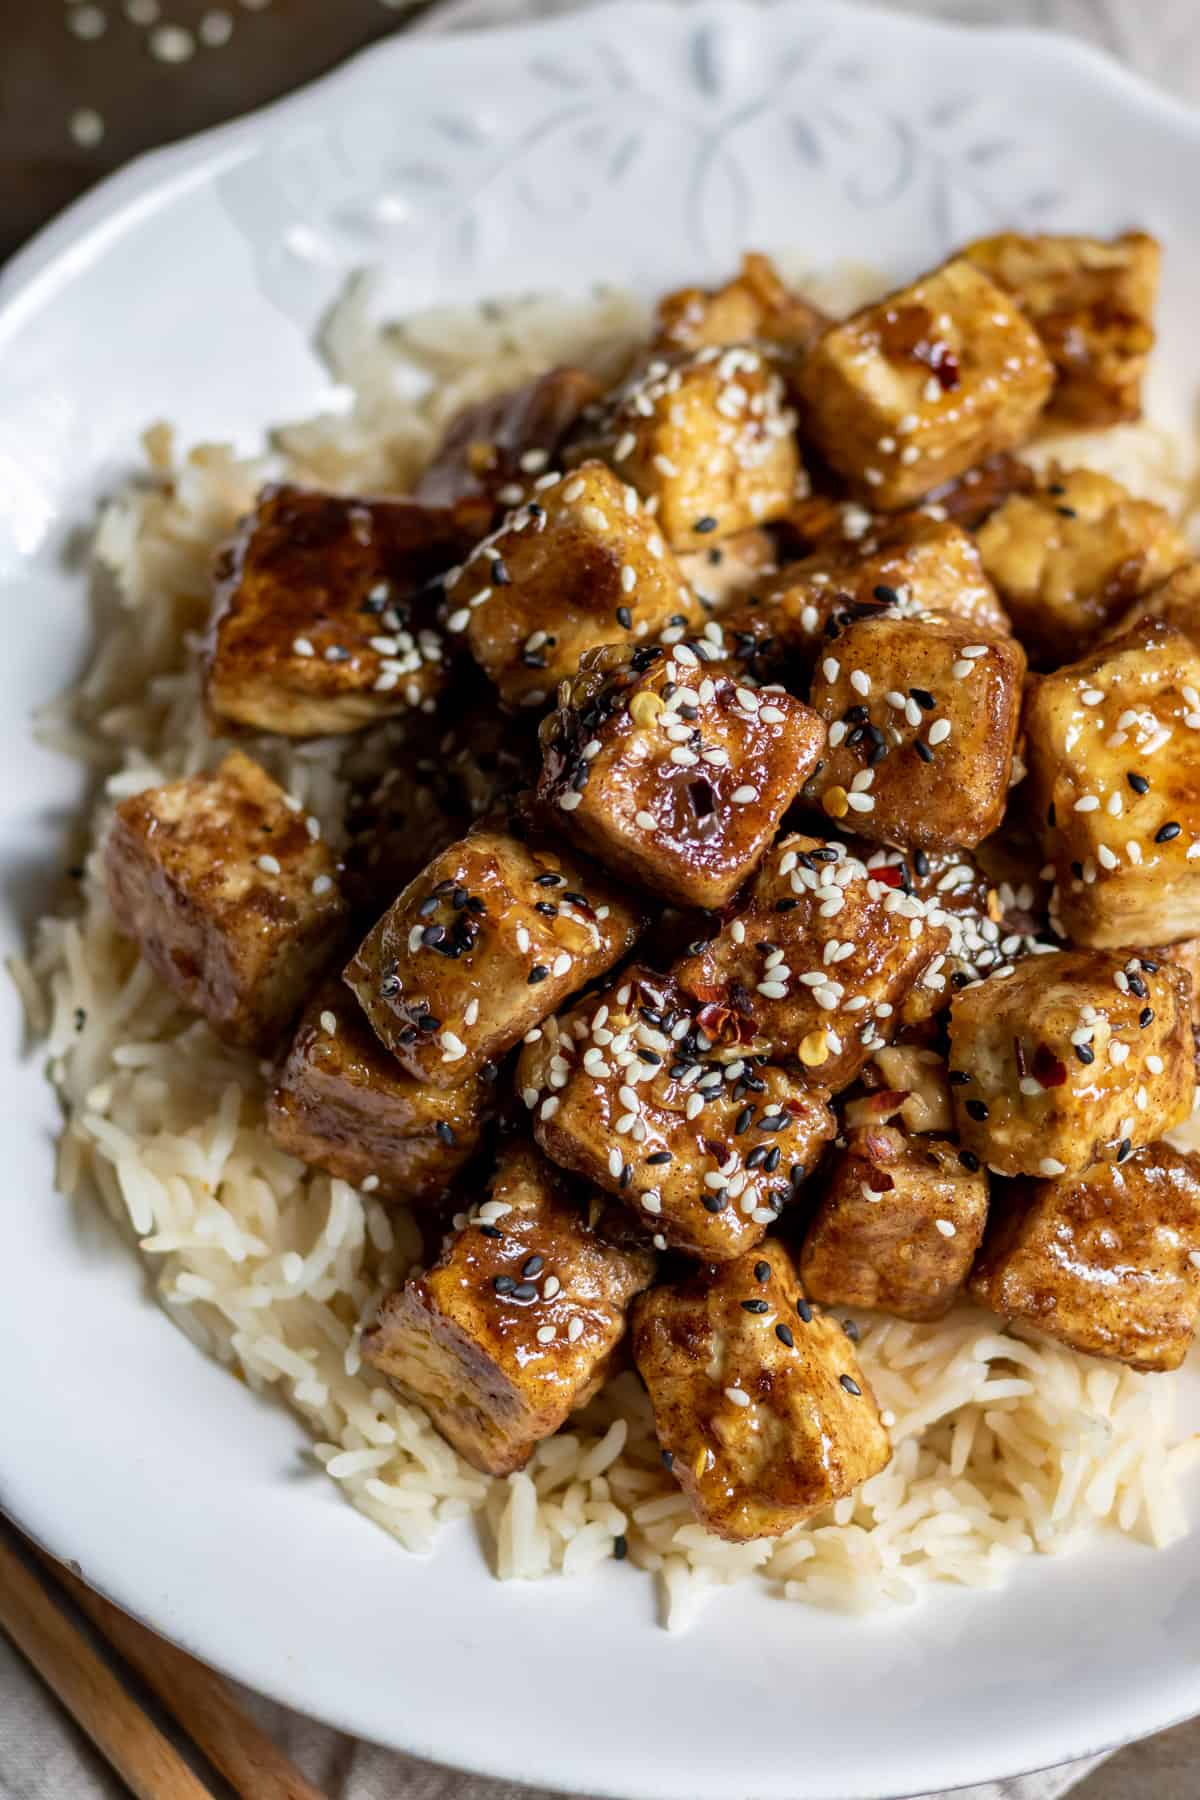 Looking down at a plate of tofu in sticky asian sauce.